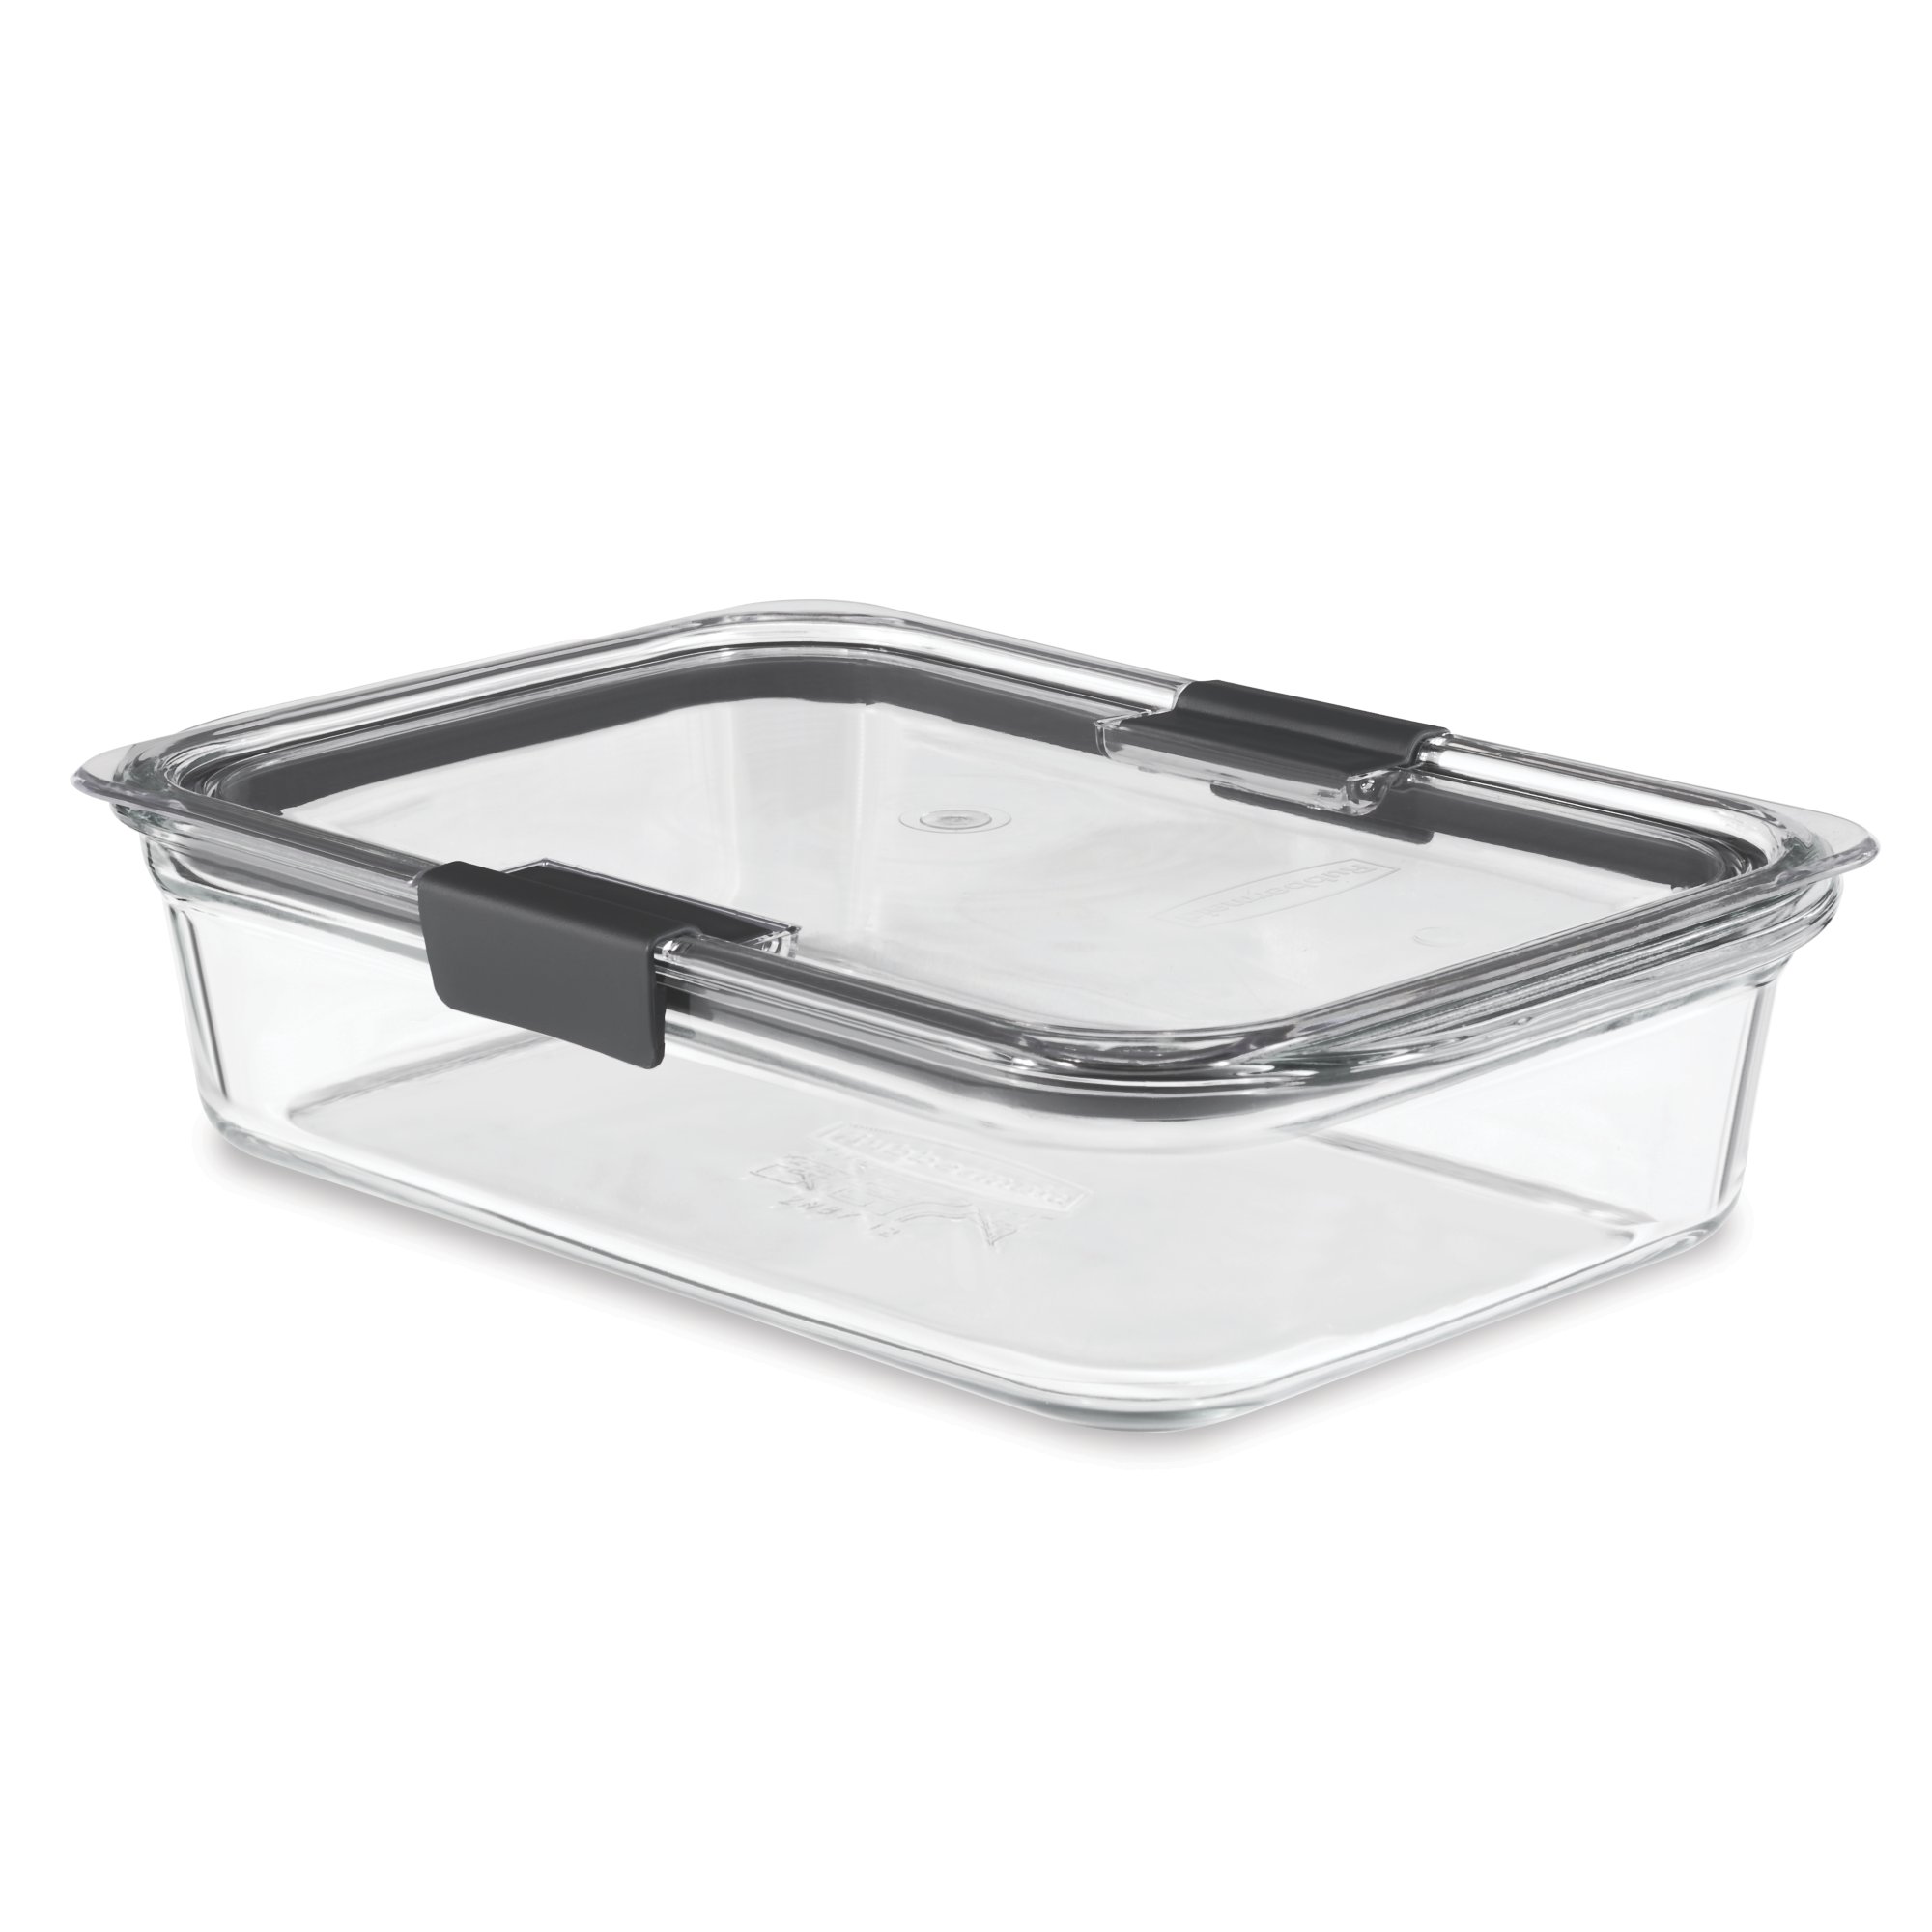 Extra Large Glass Food Storage Containers Set Of 3 - 101 OZ/ 54 OZ/ 16 OZ  Deep Rectangular Glass Food Container with Lid, Leak Proof, Microwave,  Dishwasher, and Oven Safe By Moss